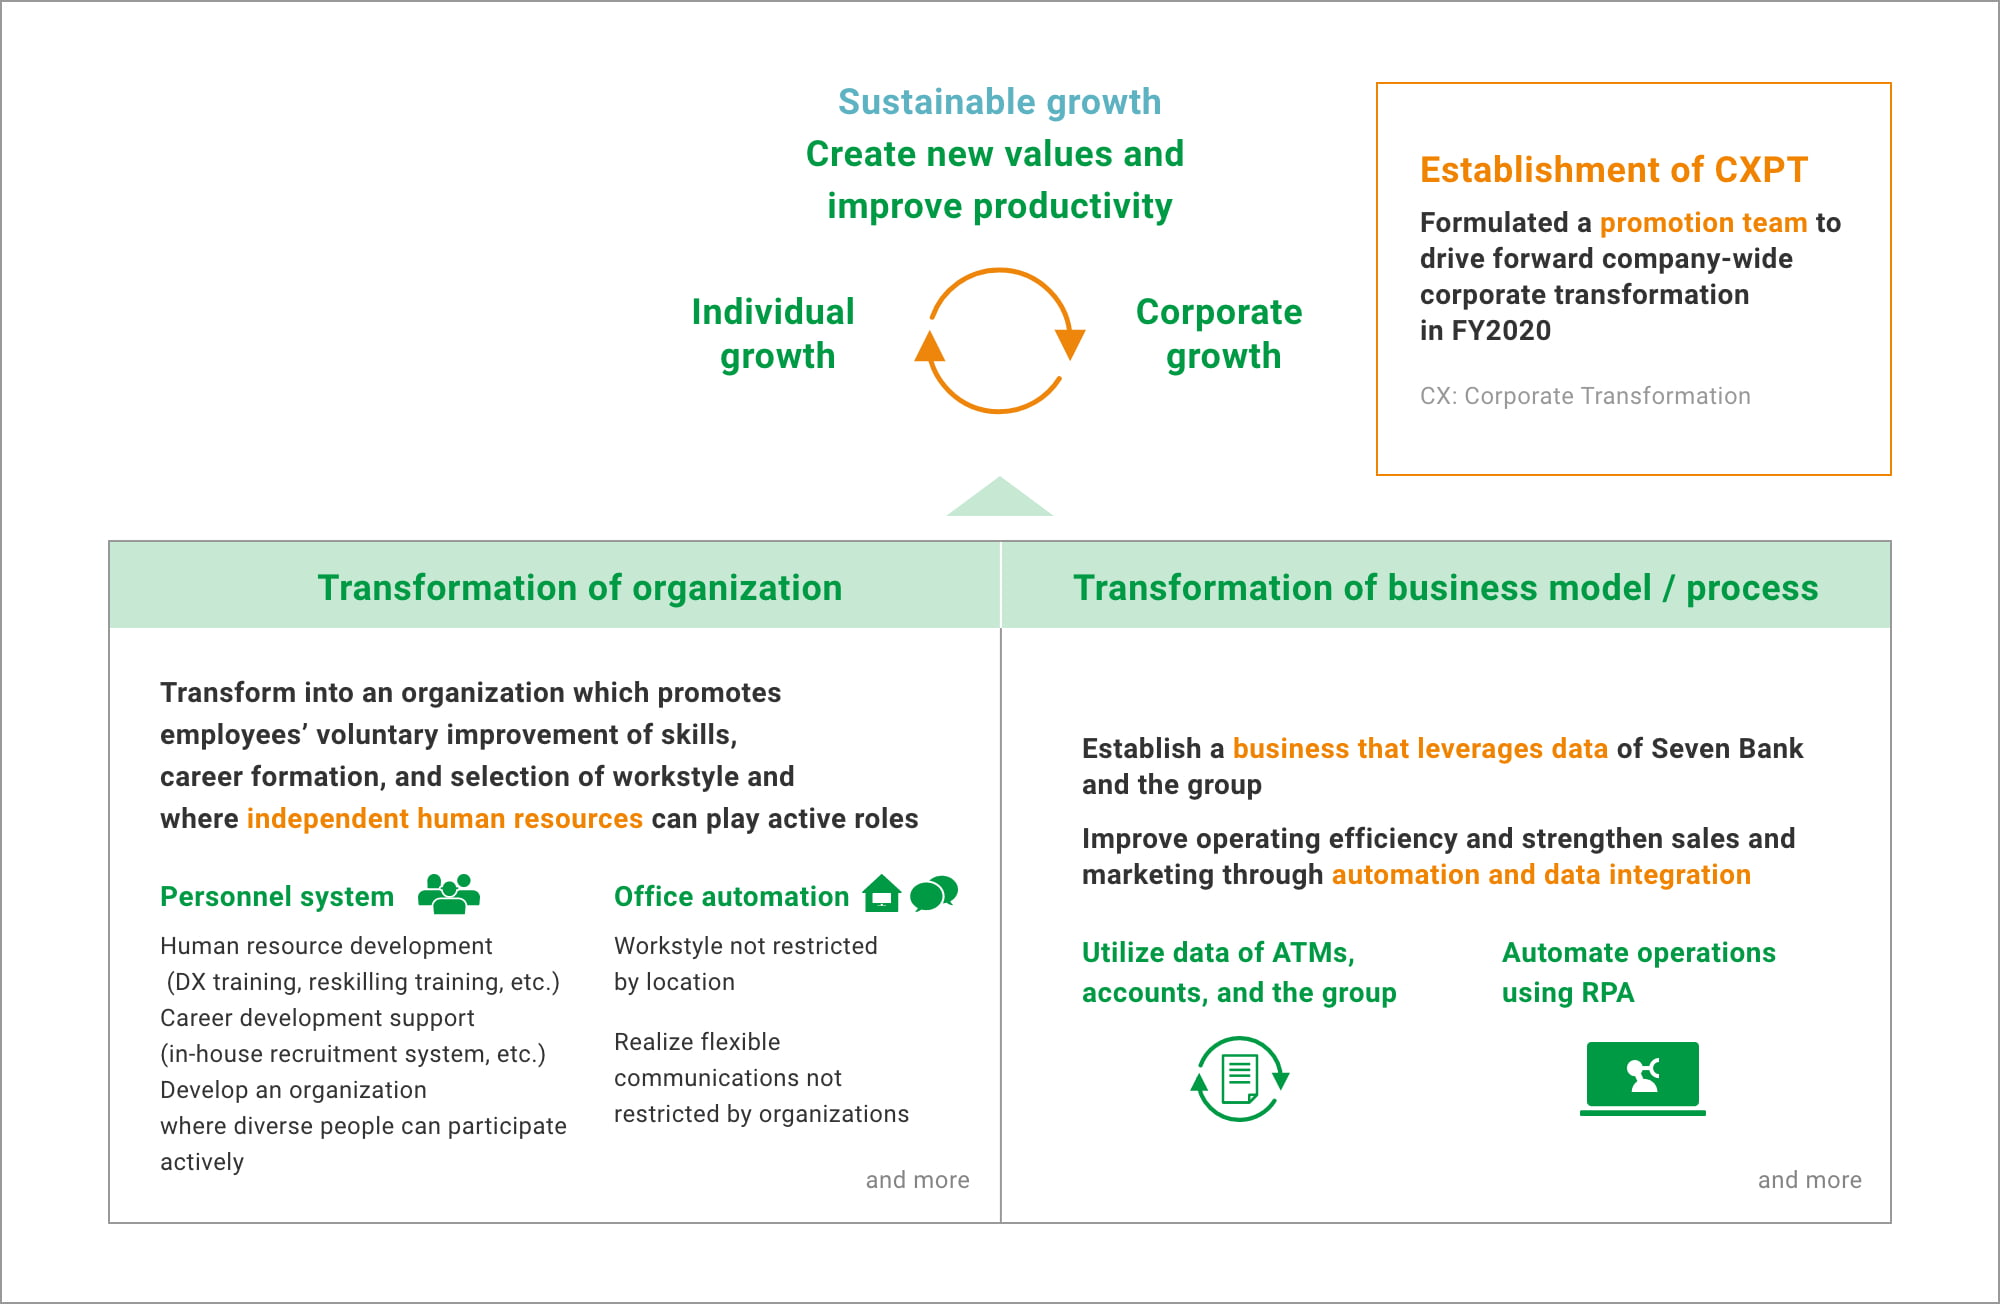 Carry out corporate transformation from both aspects of organization and business model / process